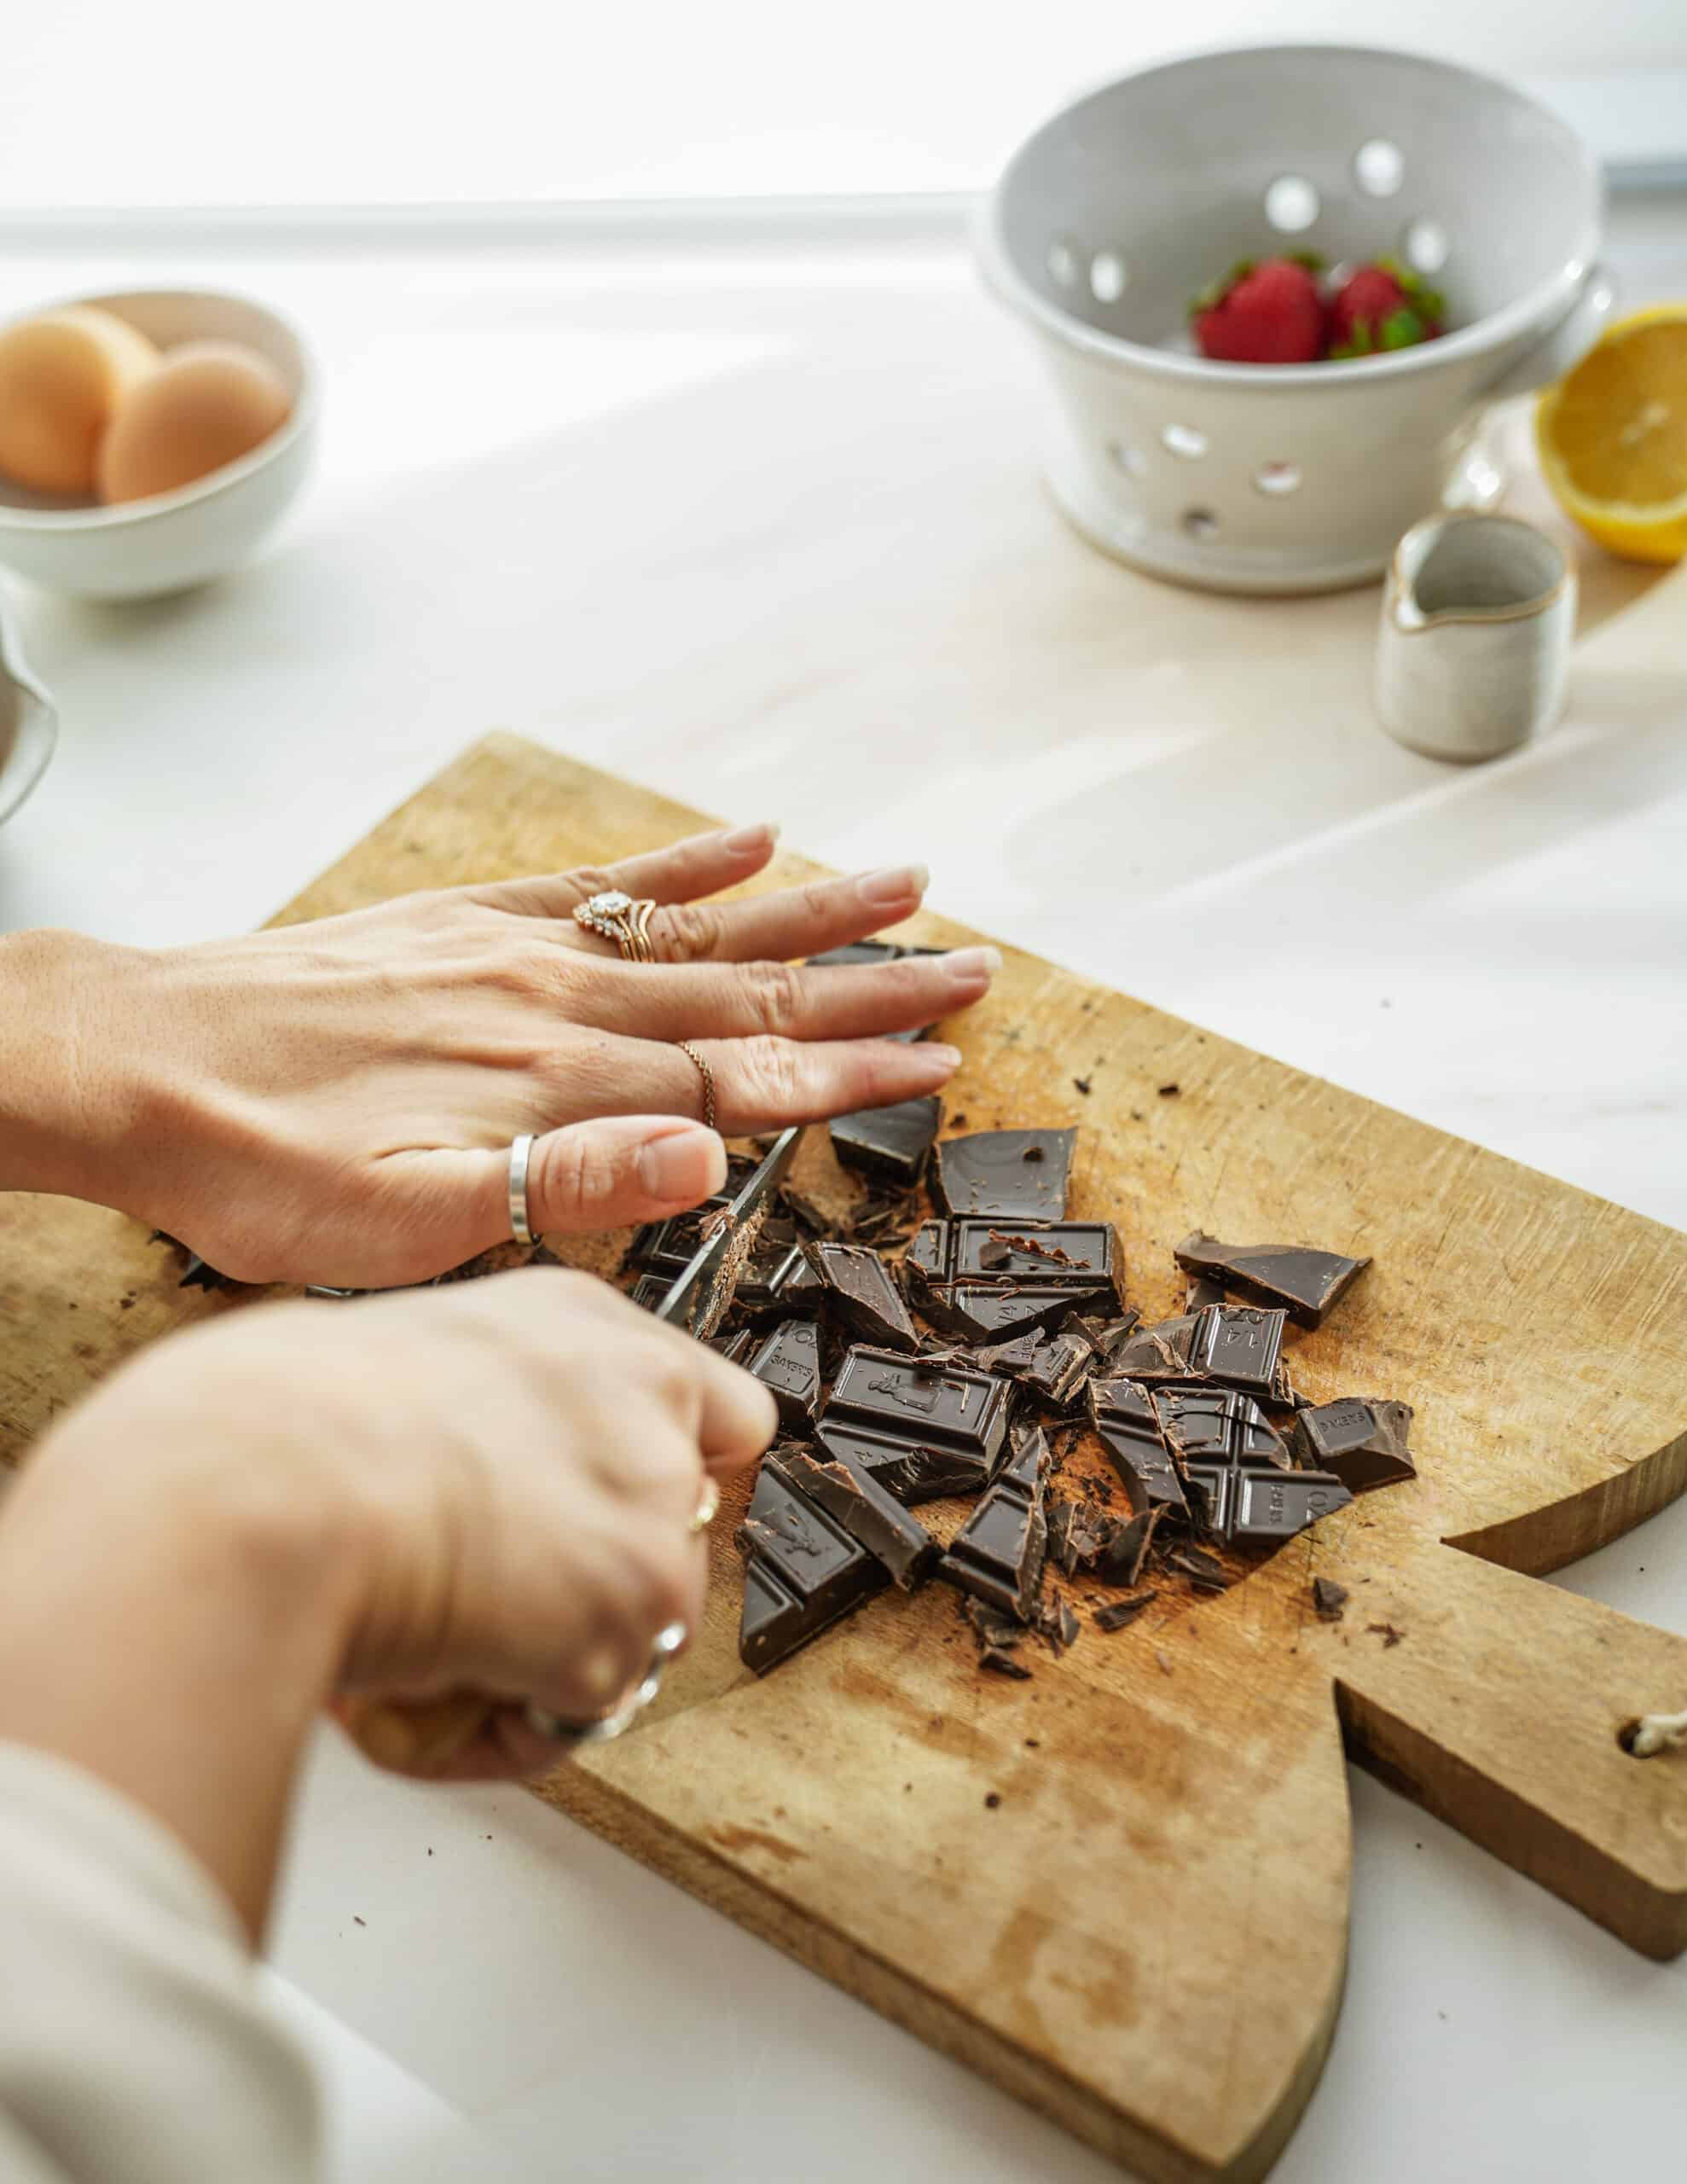 Chopping chocolate for chocolate icing